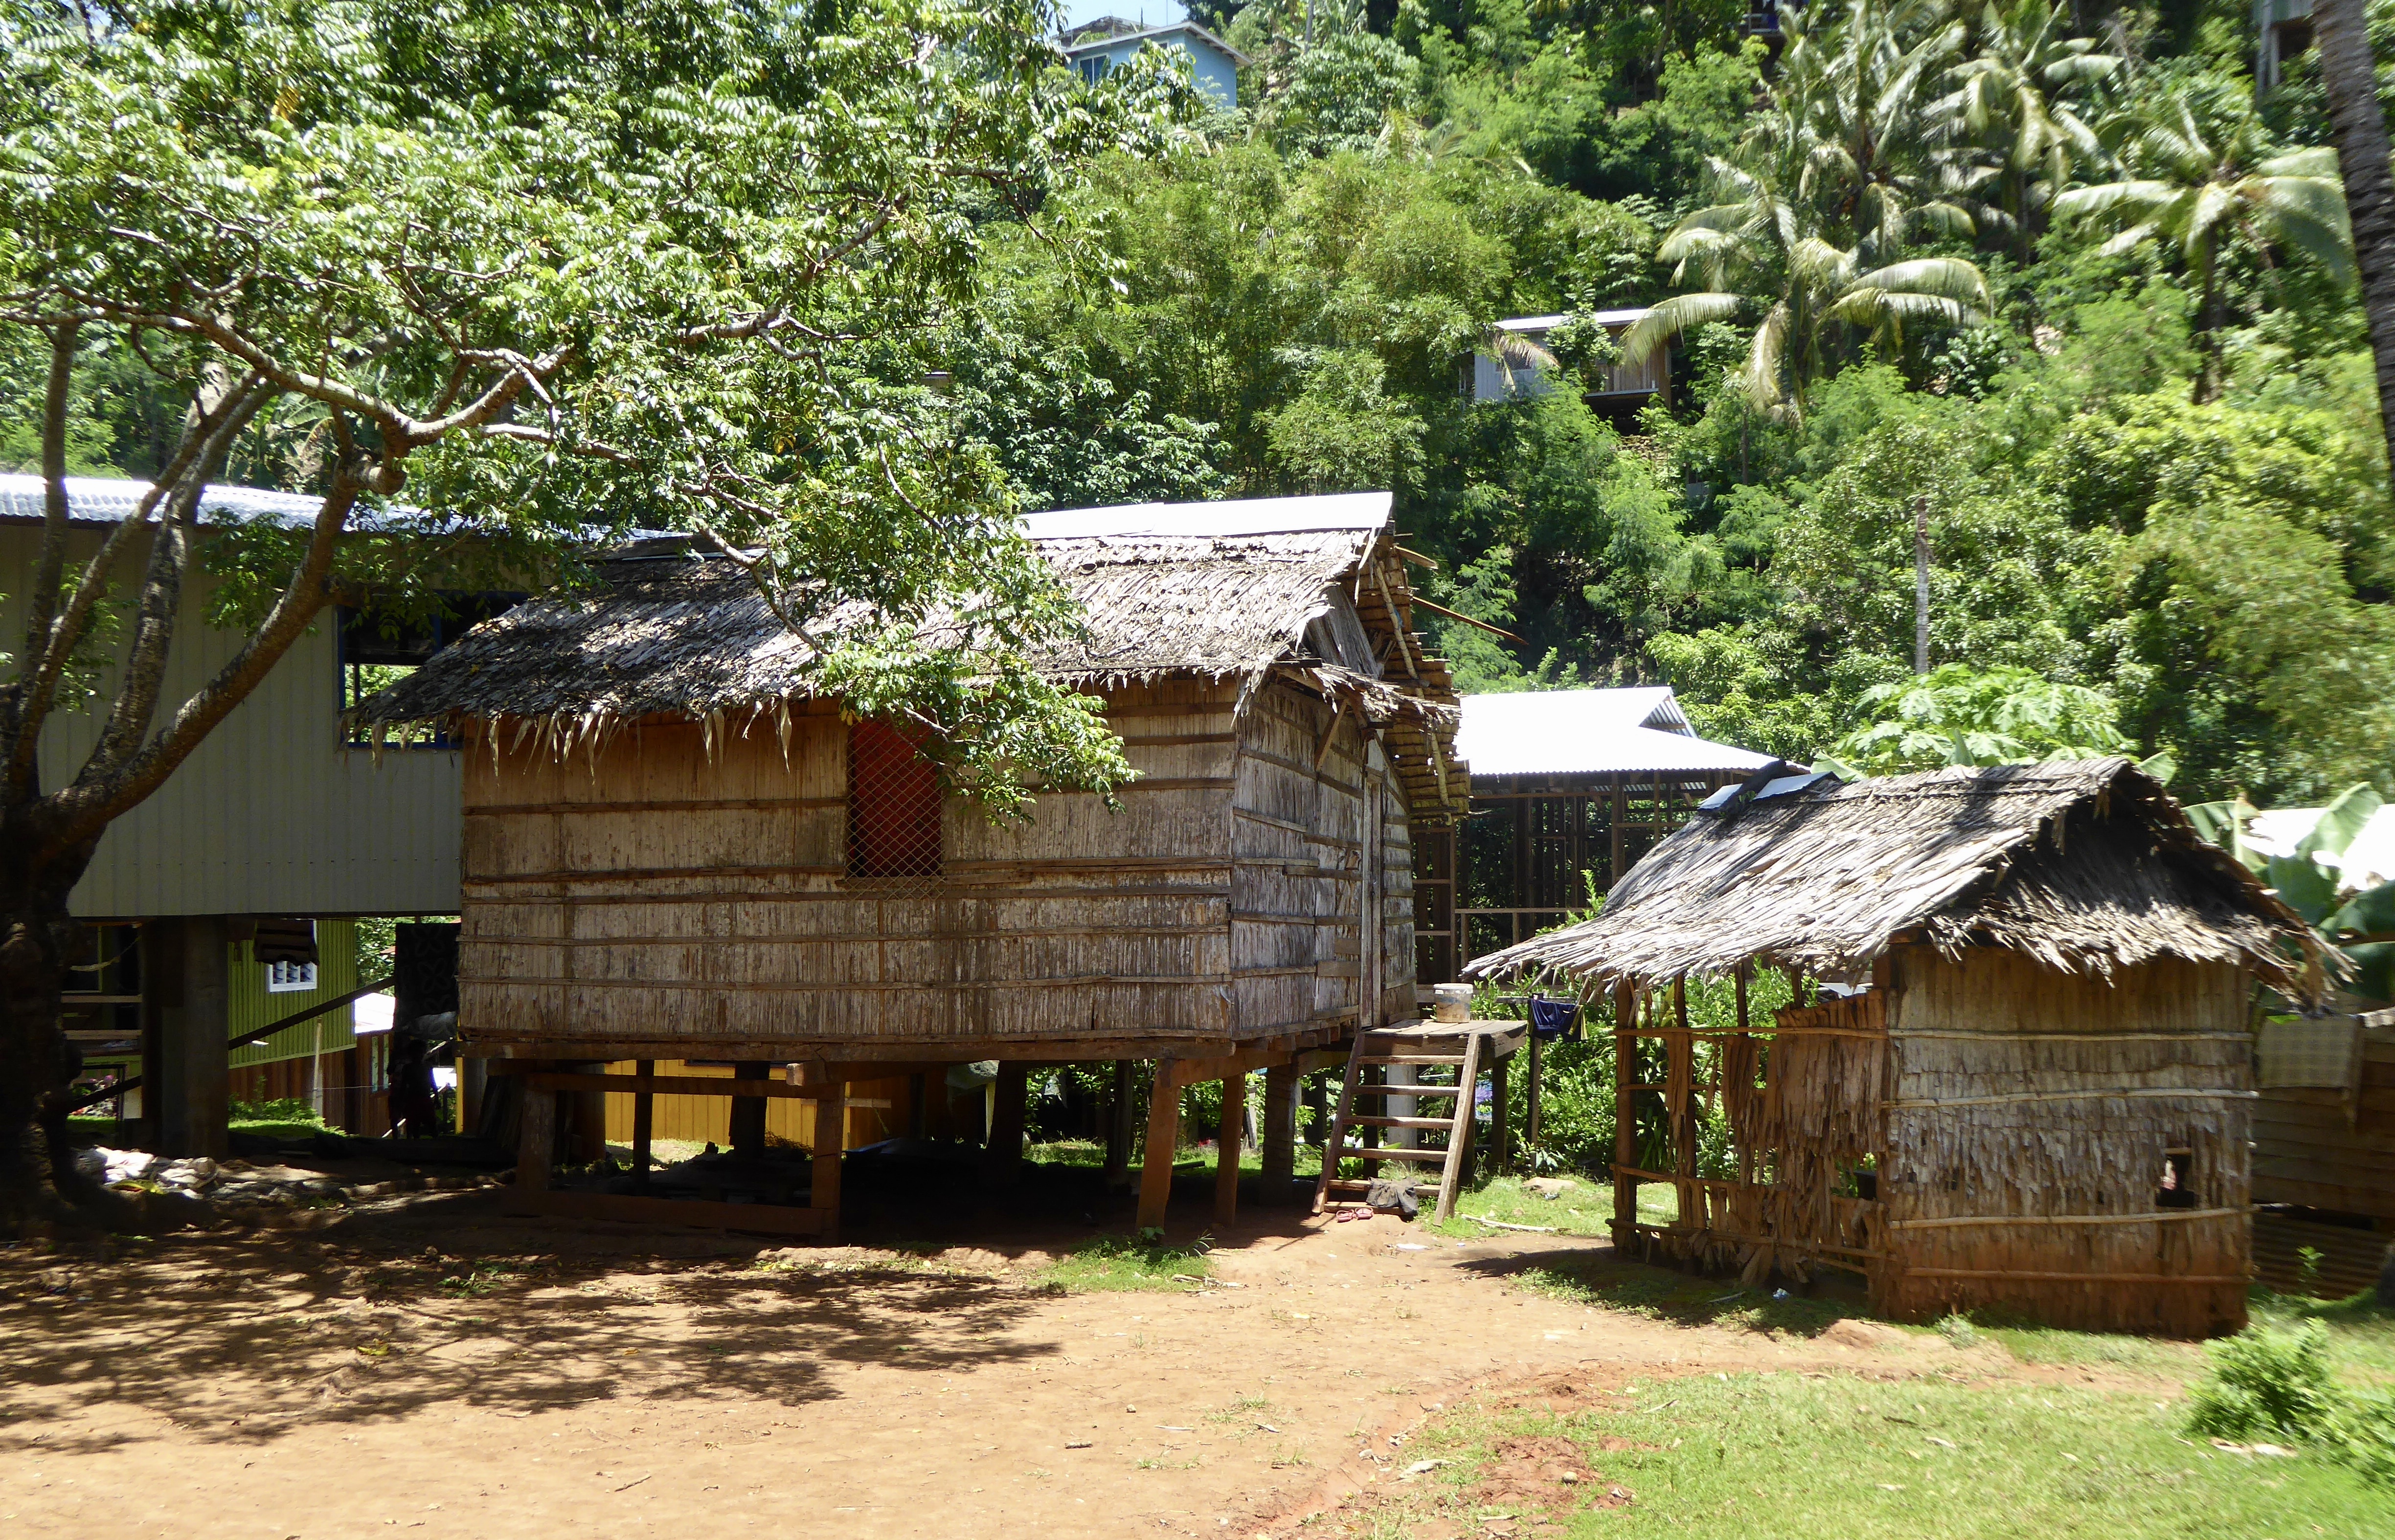 Photo of houses made from natural resources. One house is elevated off the ground. In the foreground is mostly dirt with some patches of grass. Trees litter the background with green folliage.